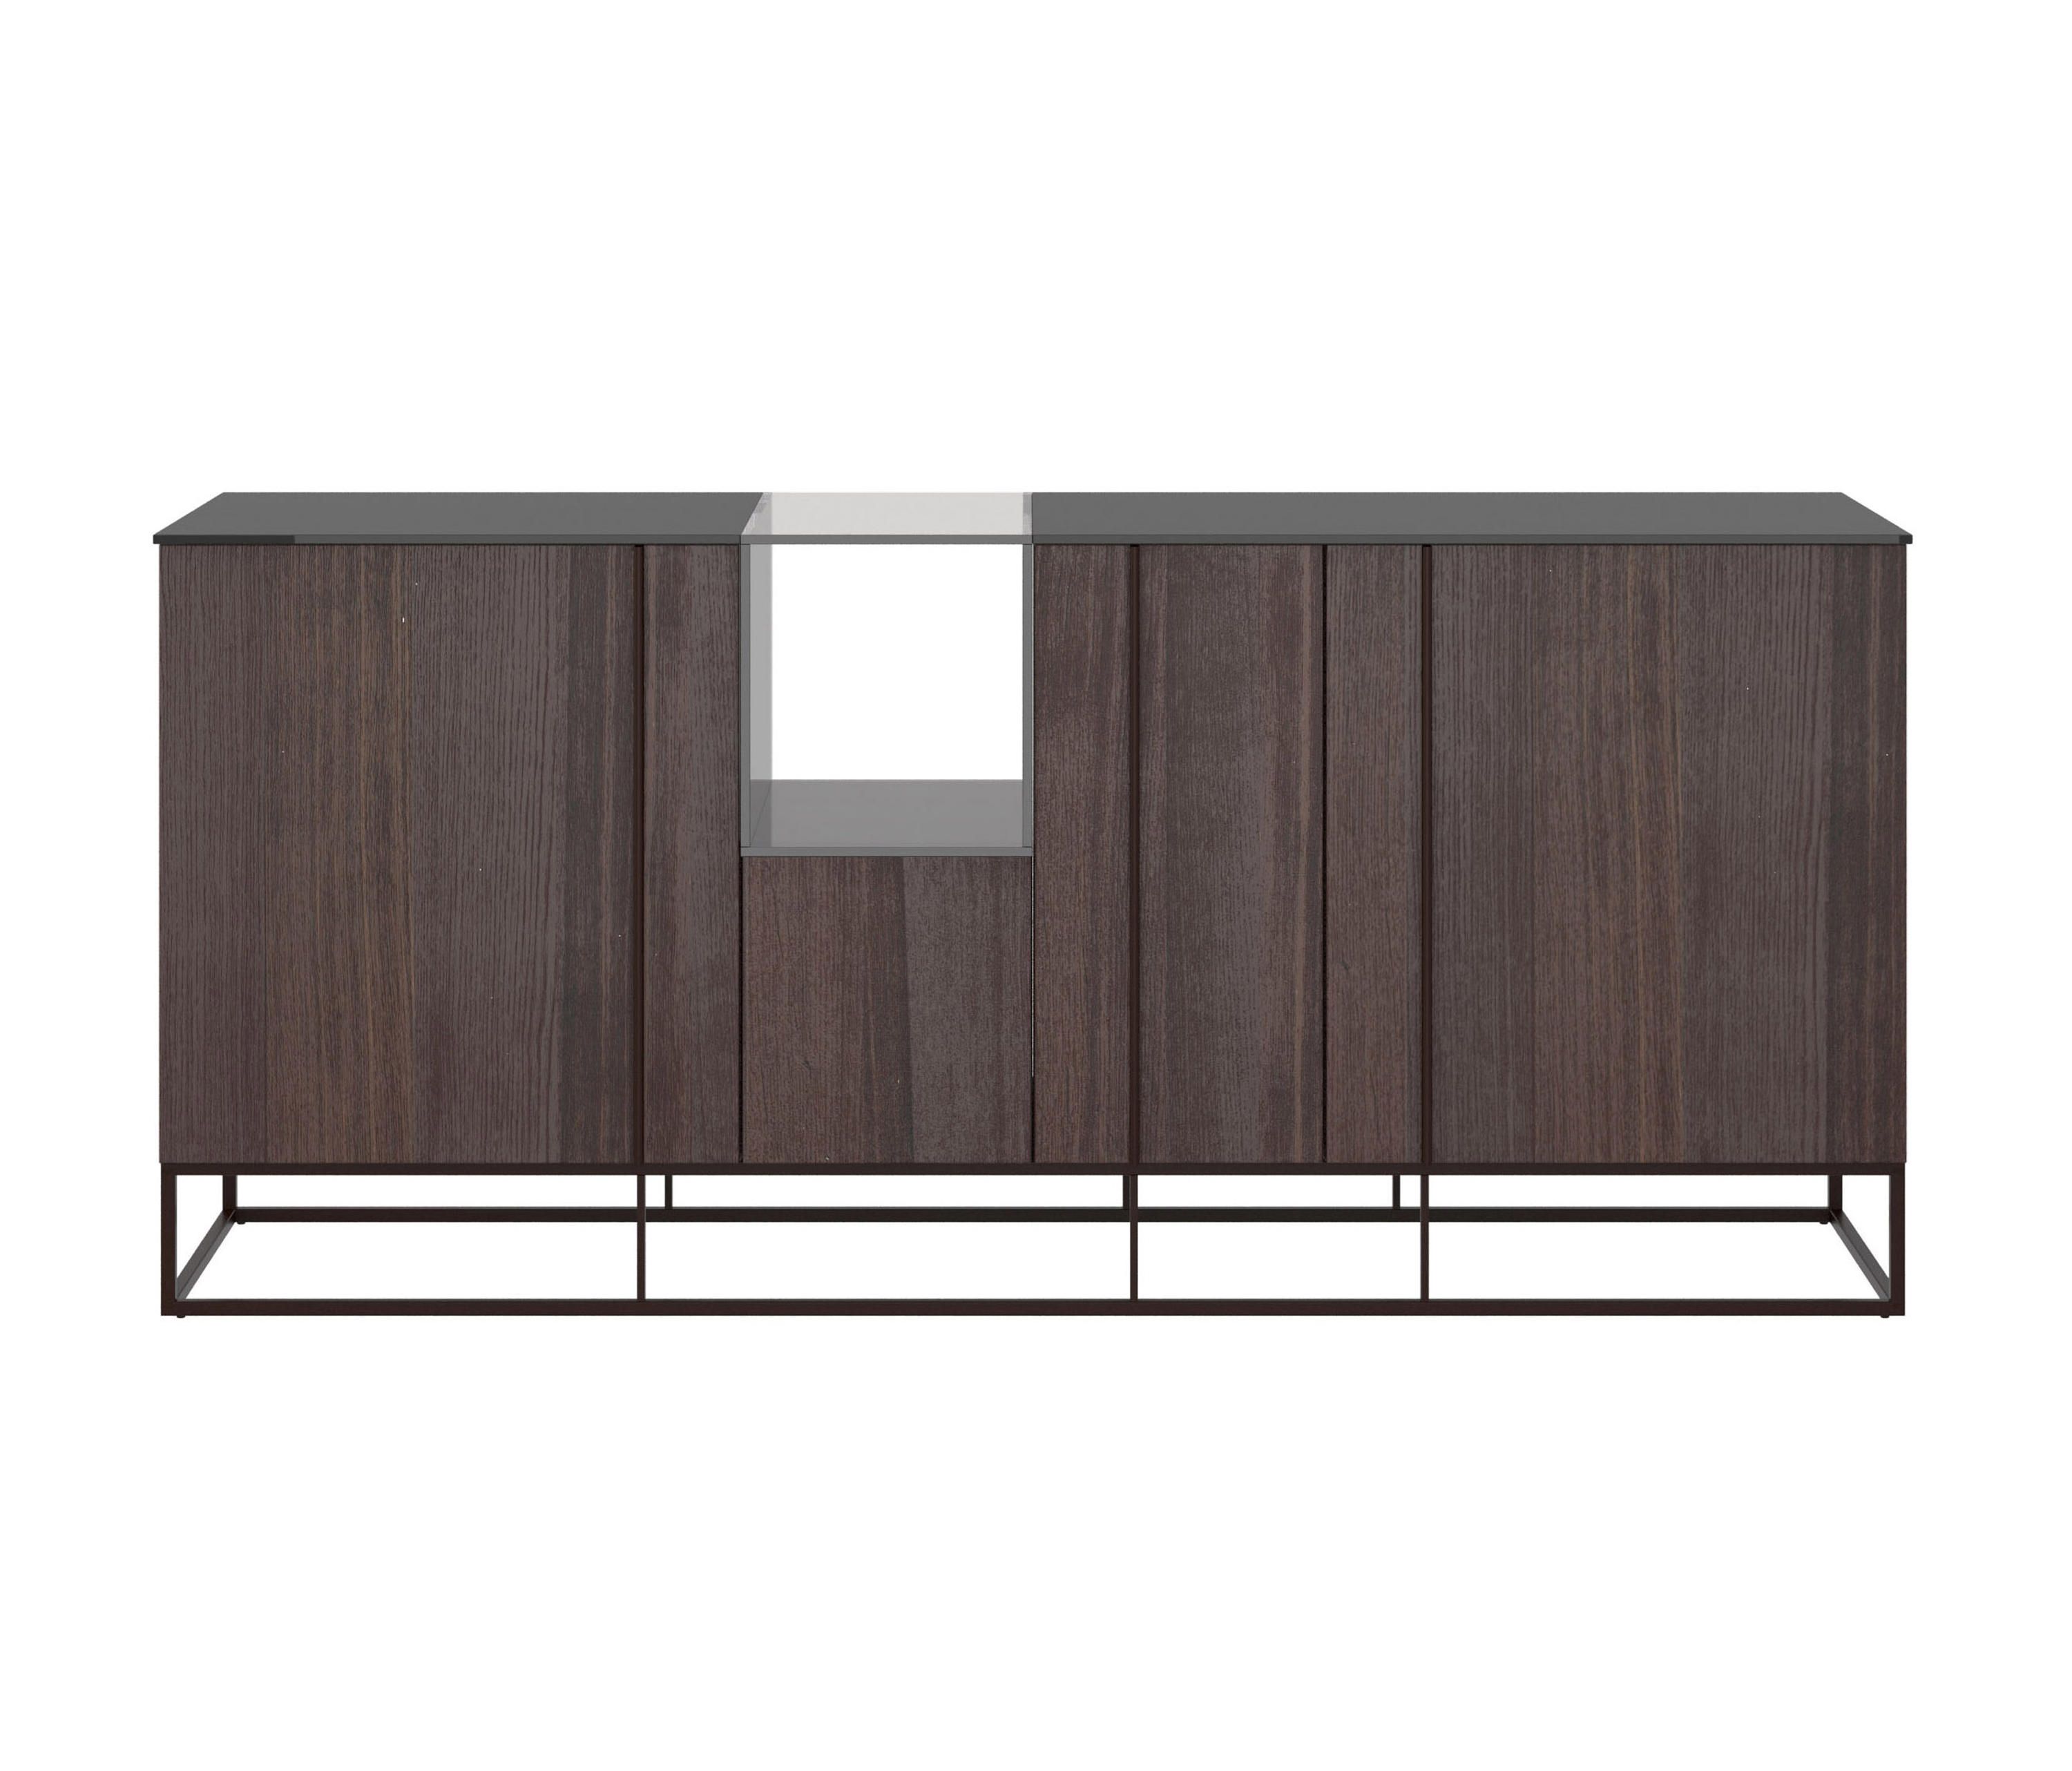 Tate – Sideboards From Jesse | Architonic Throughout Tate Sideboards (View 1 of 20)